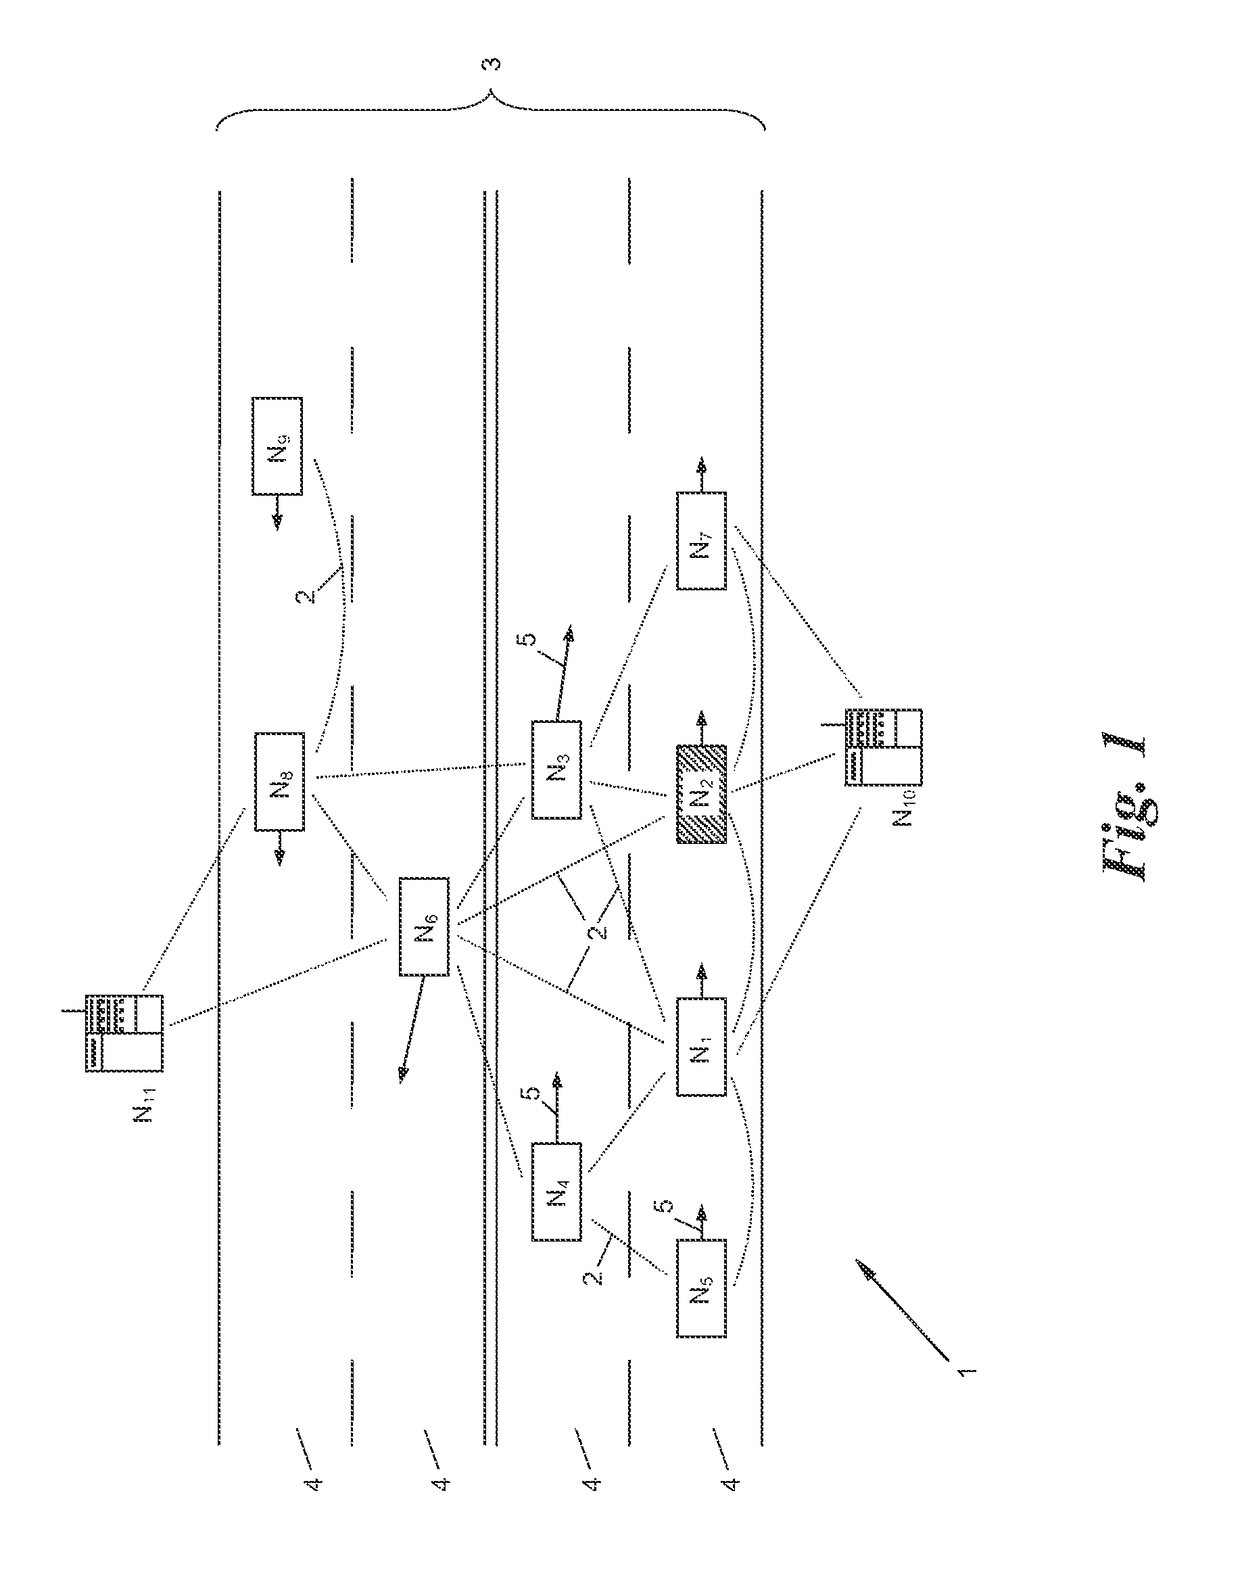 Method for transmitting messages in ad hoc networks